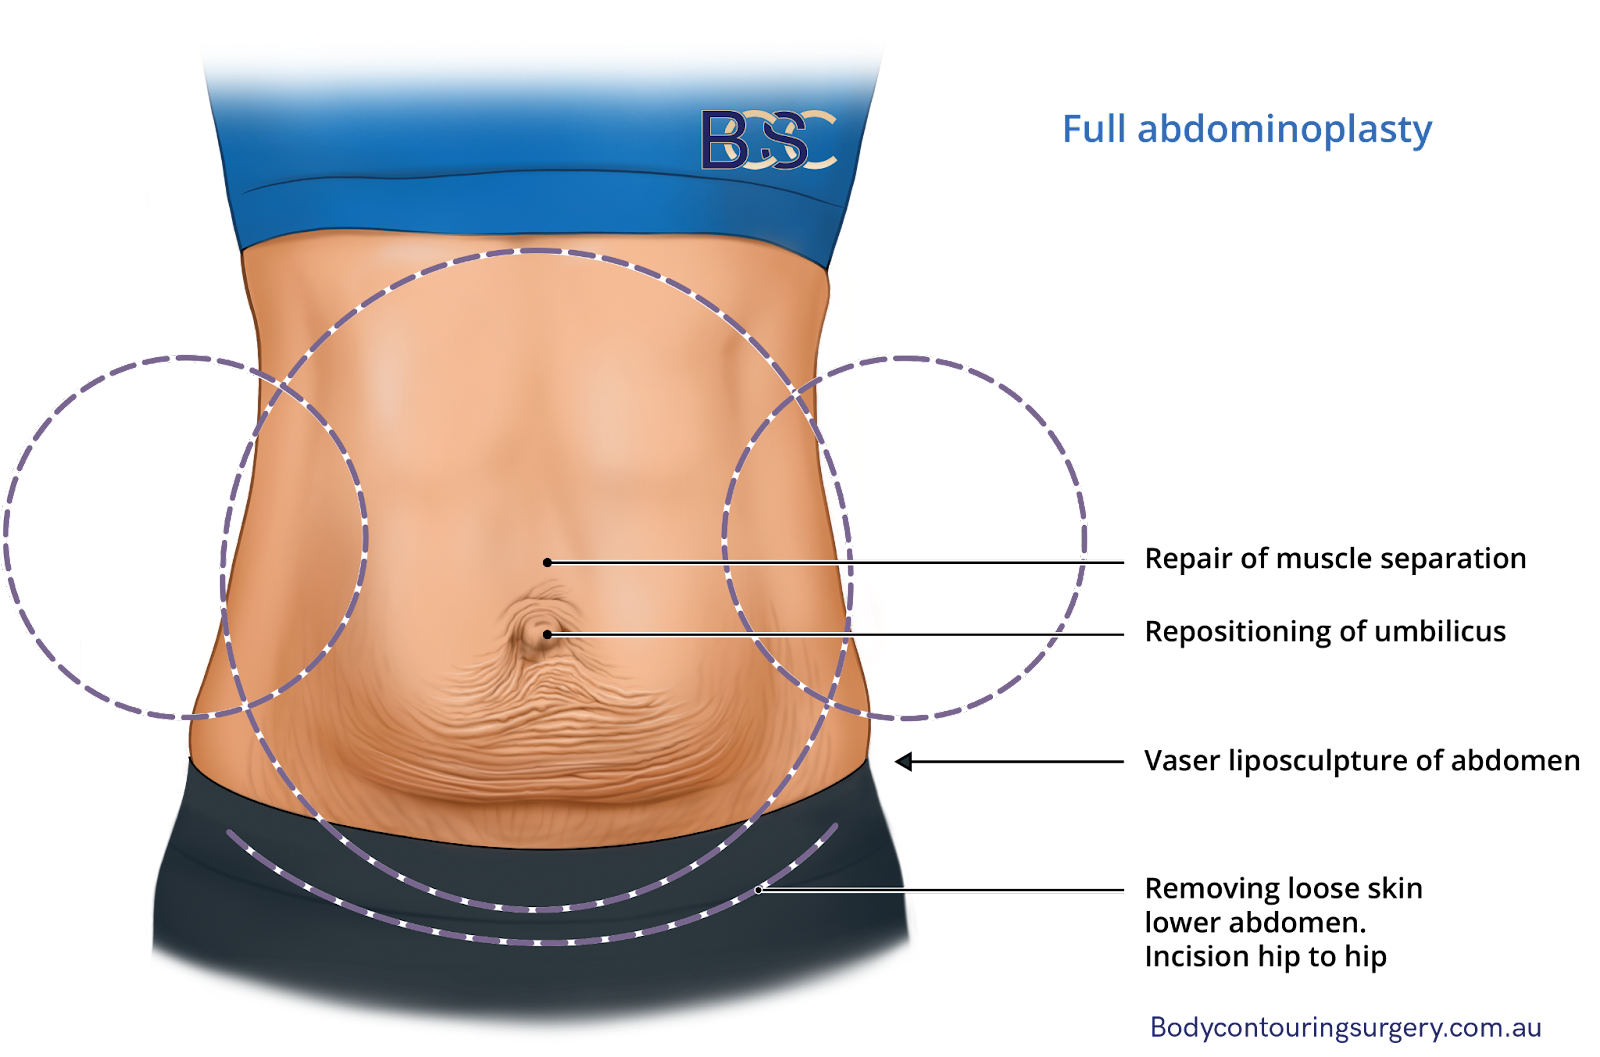 What Does the Circumferntial Tummy Tuck Recovery Timeline Look Like?